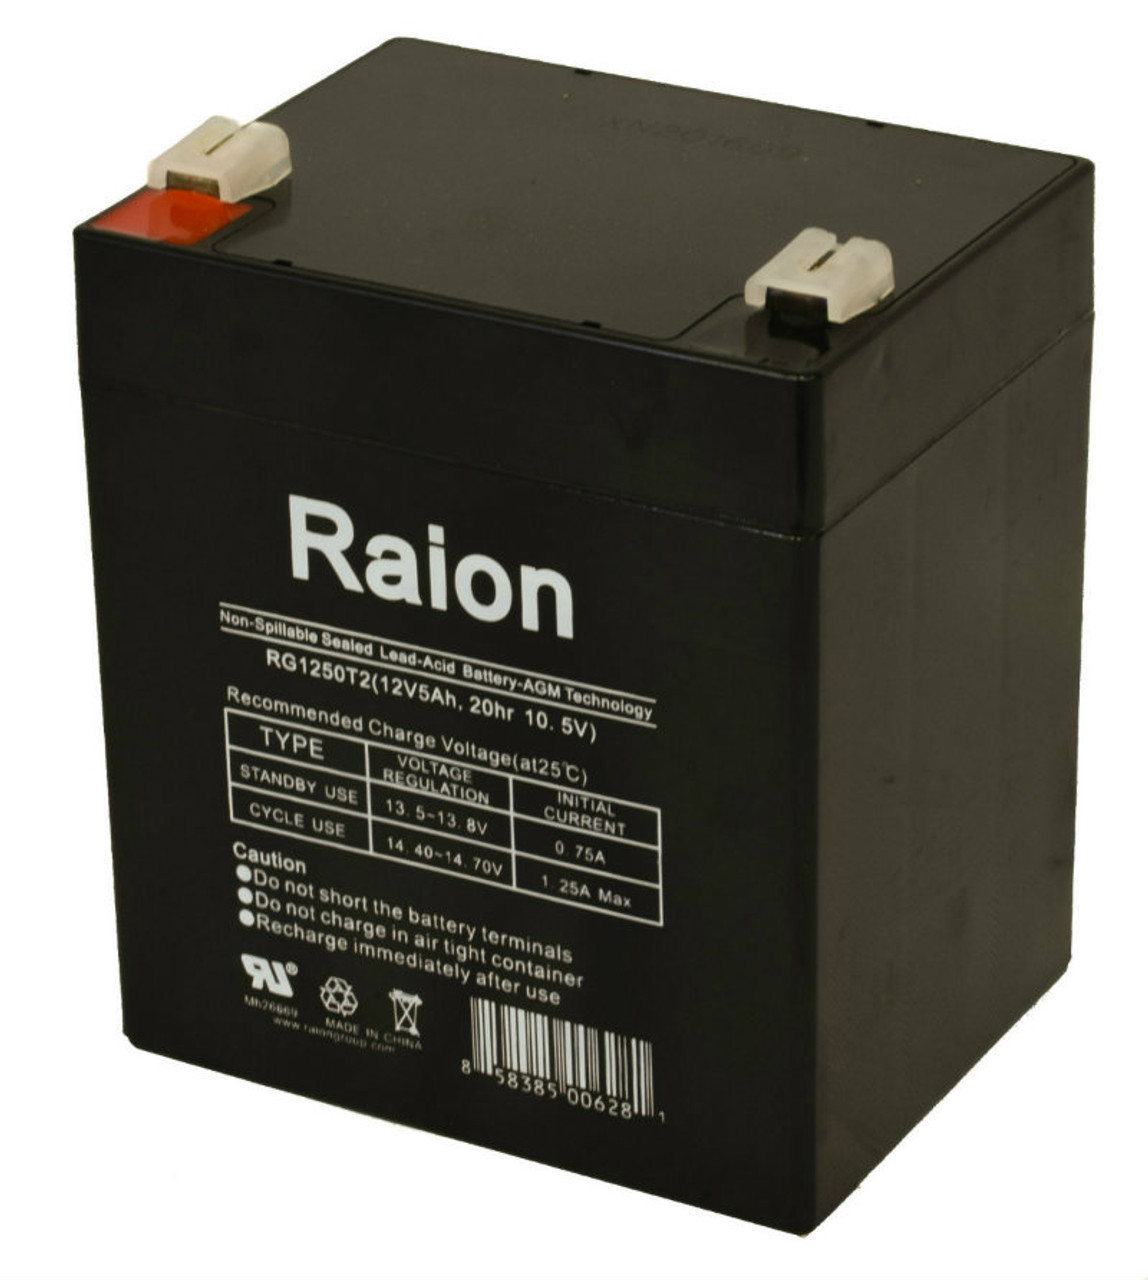 Raion Power 12V 5Ah SLA Battery With T1 Terminals For Valen Topin 12 TP 5 F1